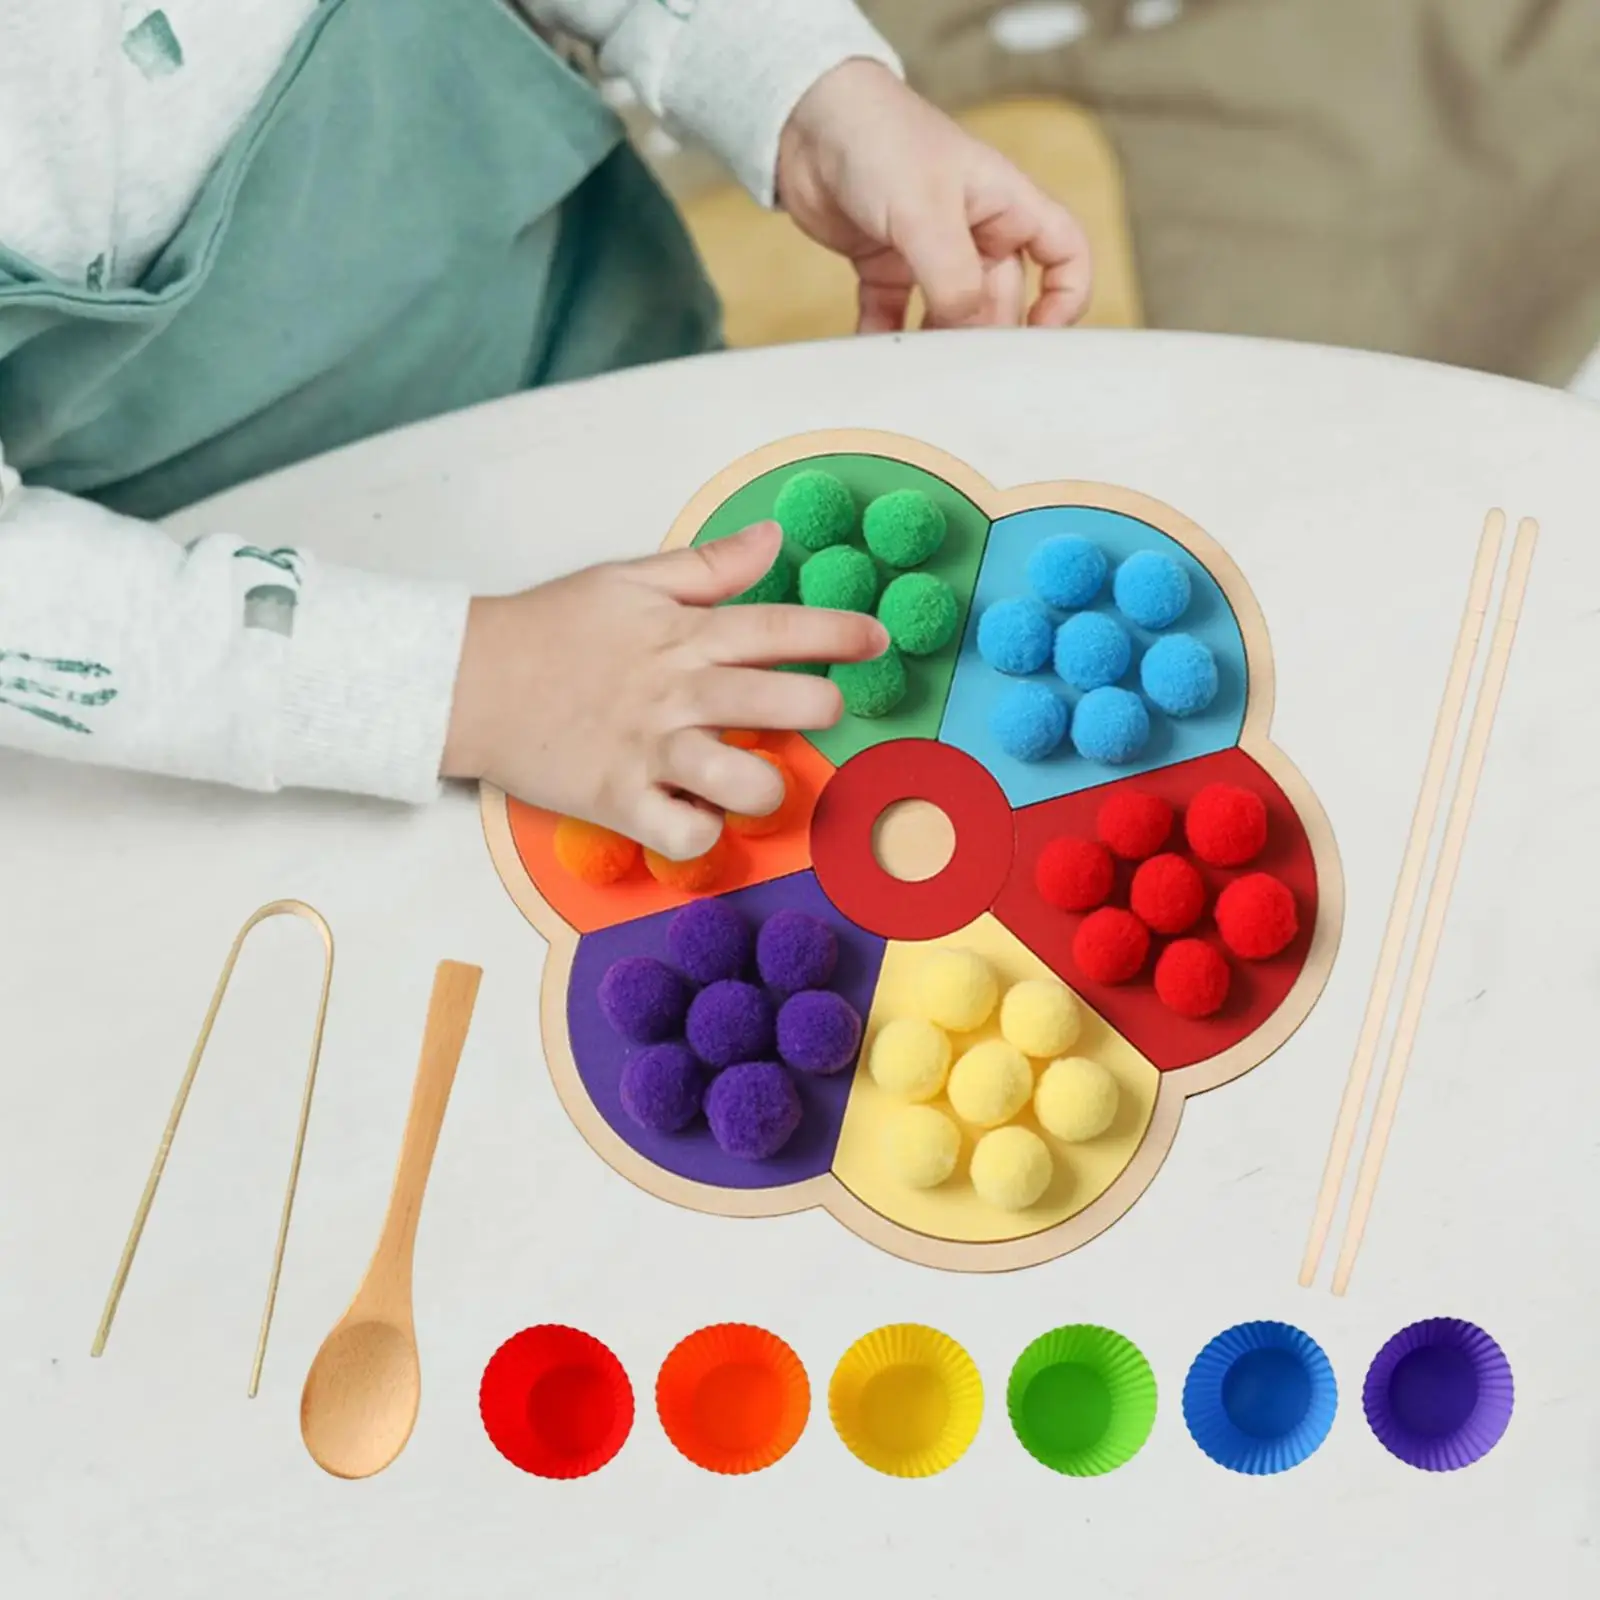 Rainbow Peg Board Early Education Color Sorting Game Fine Motor Skill Counting Color Sorting Toys for Preschool Birthday Gifts